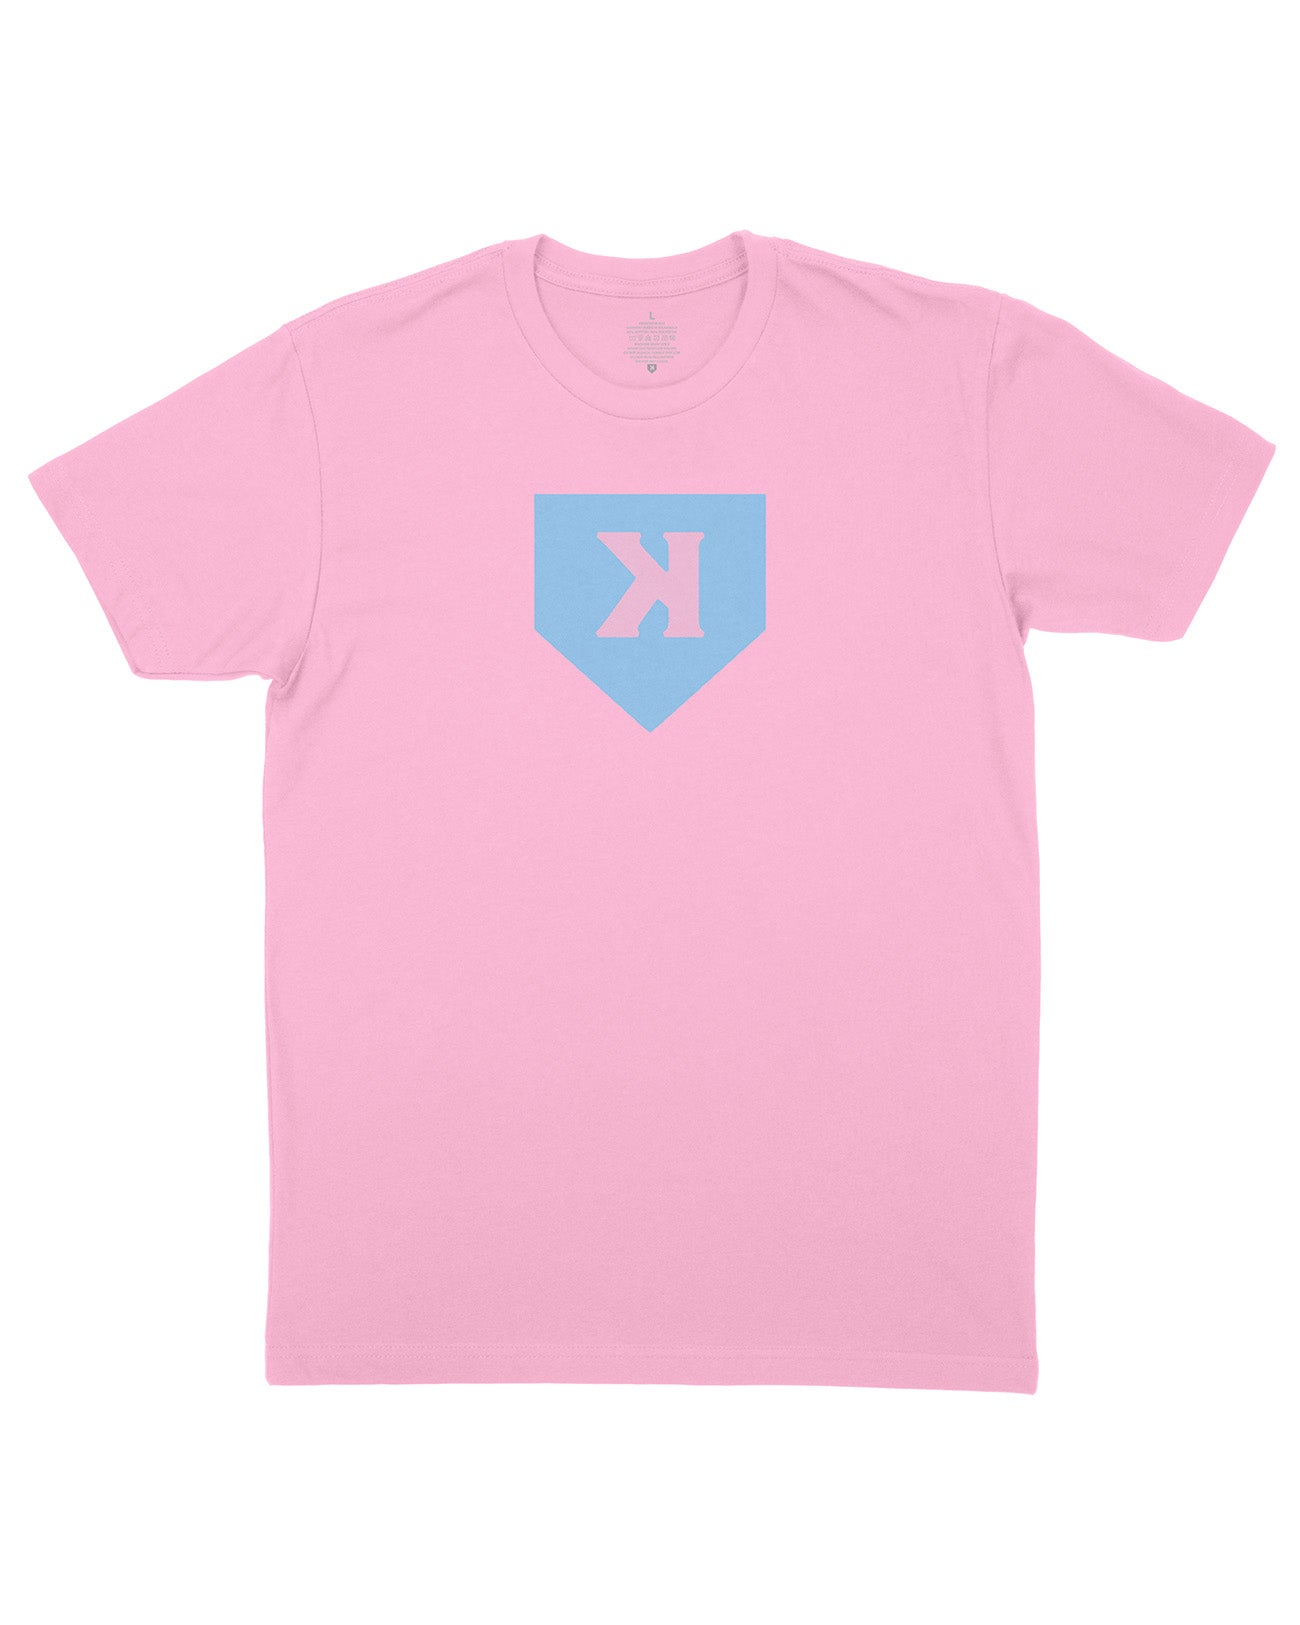 Cotton Candy Pink Youth Tee